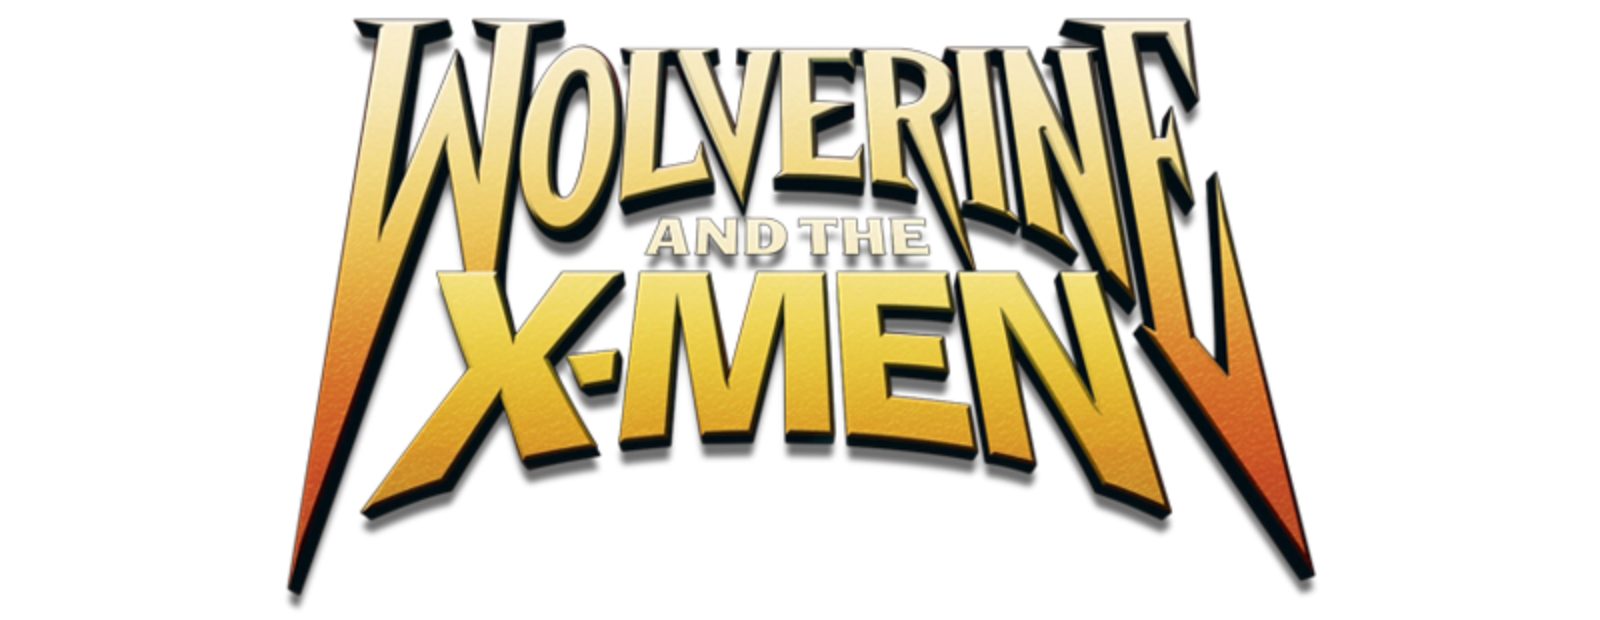 Wolverine and the X-Men 